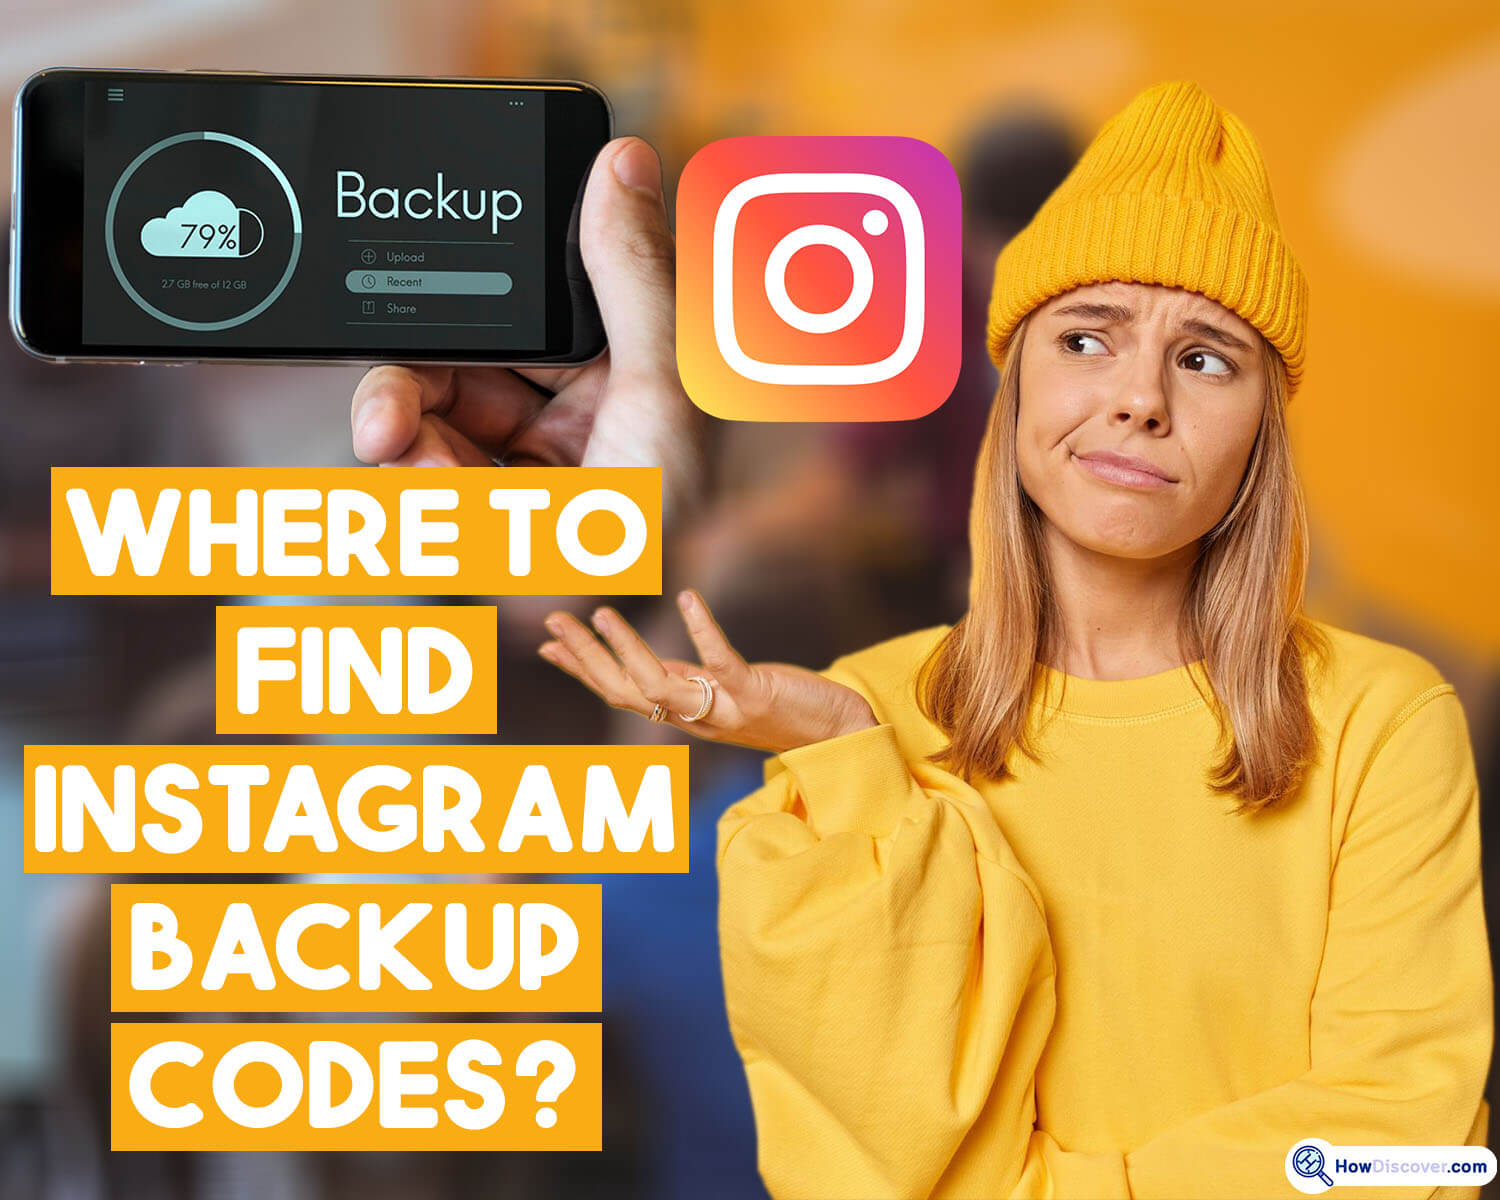 Where To Find Instagram Backup Codes